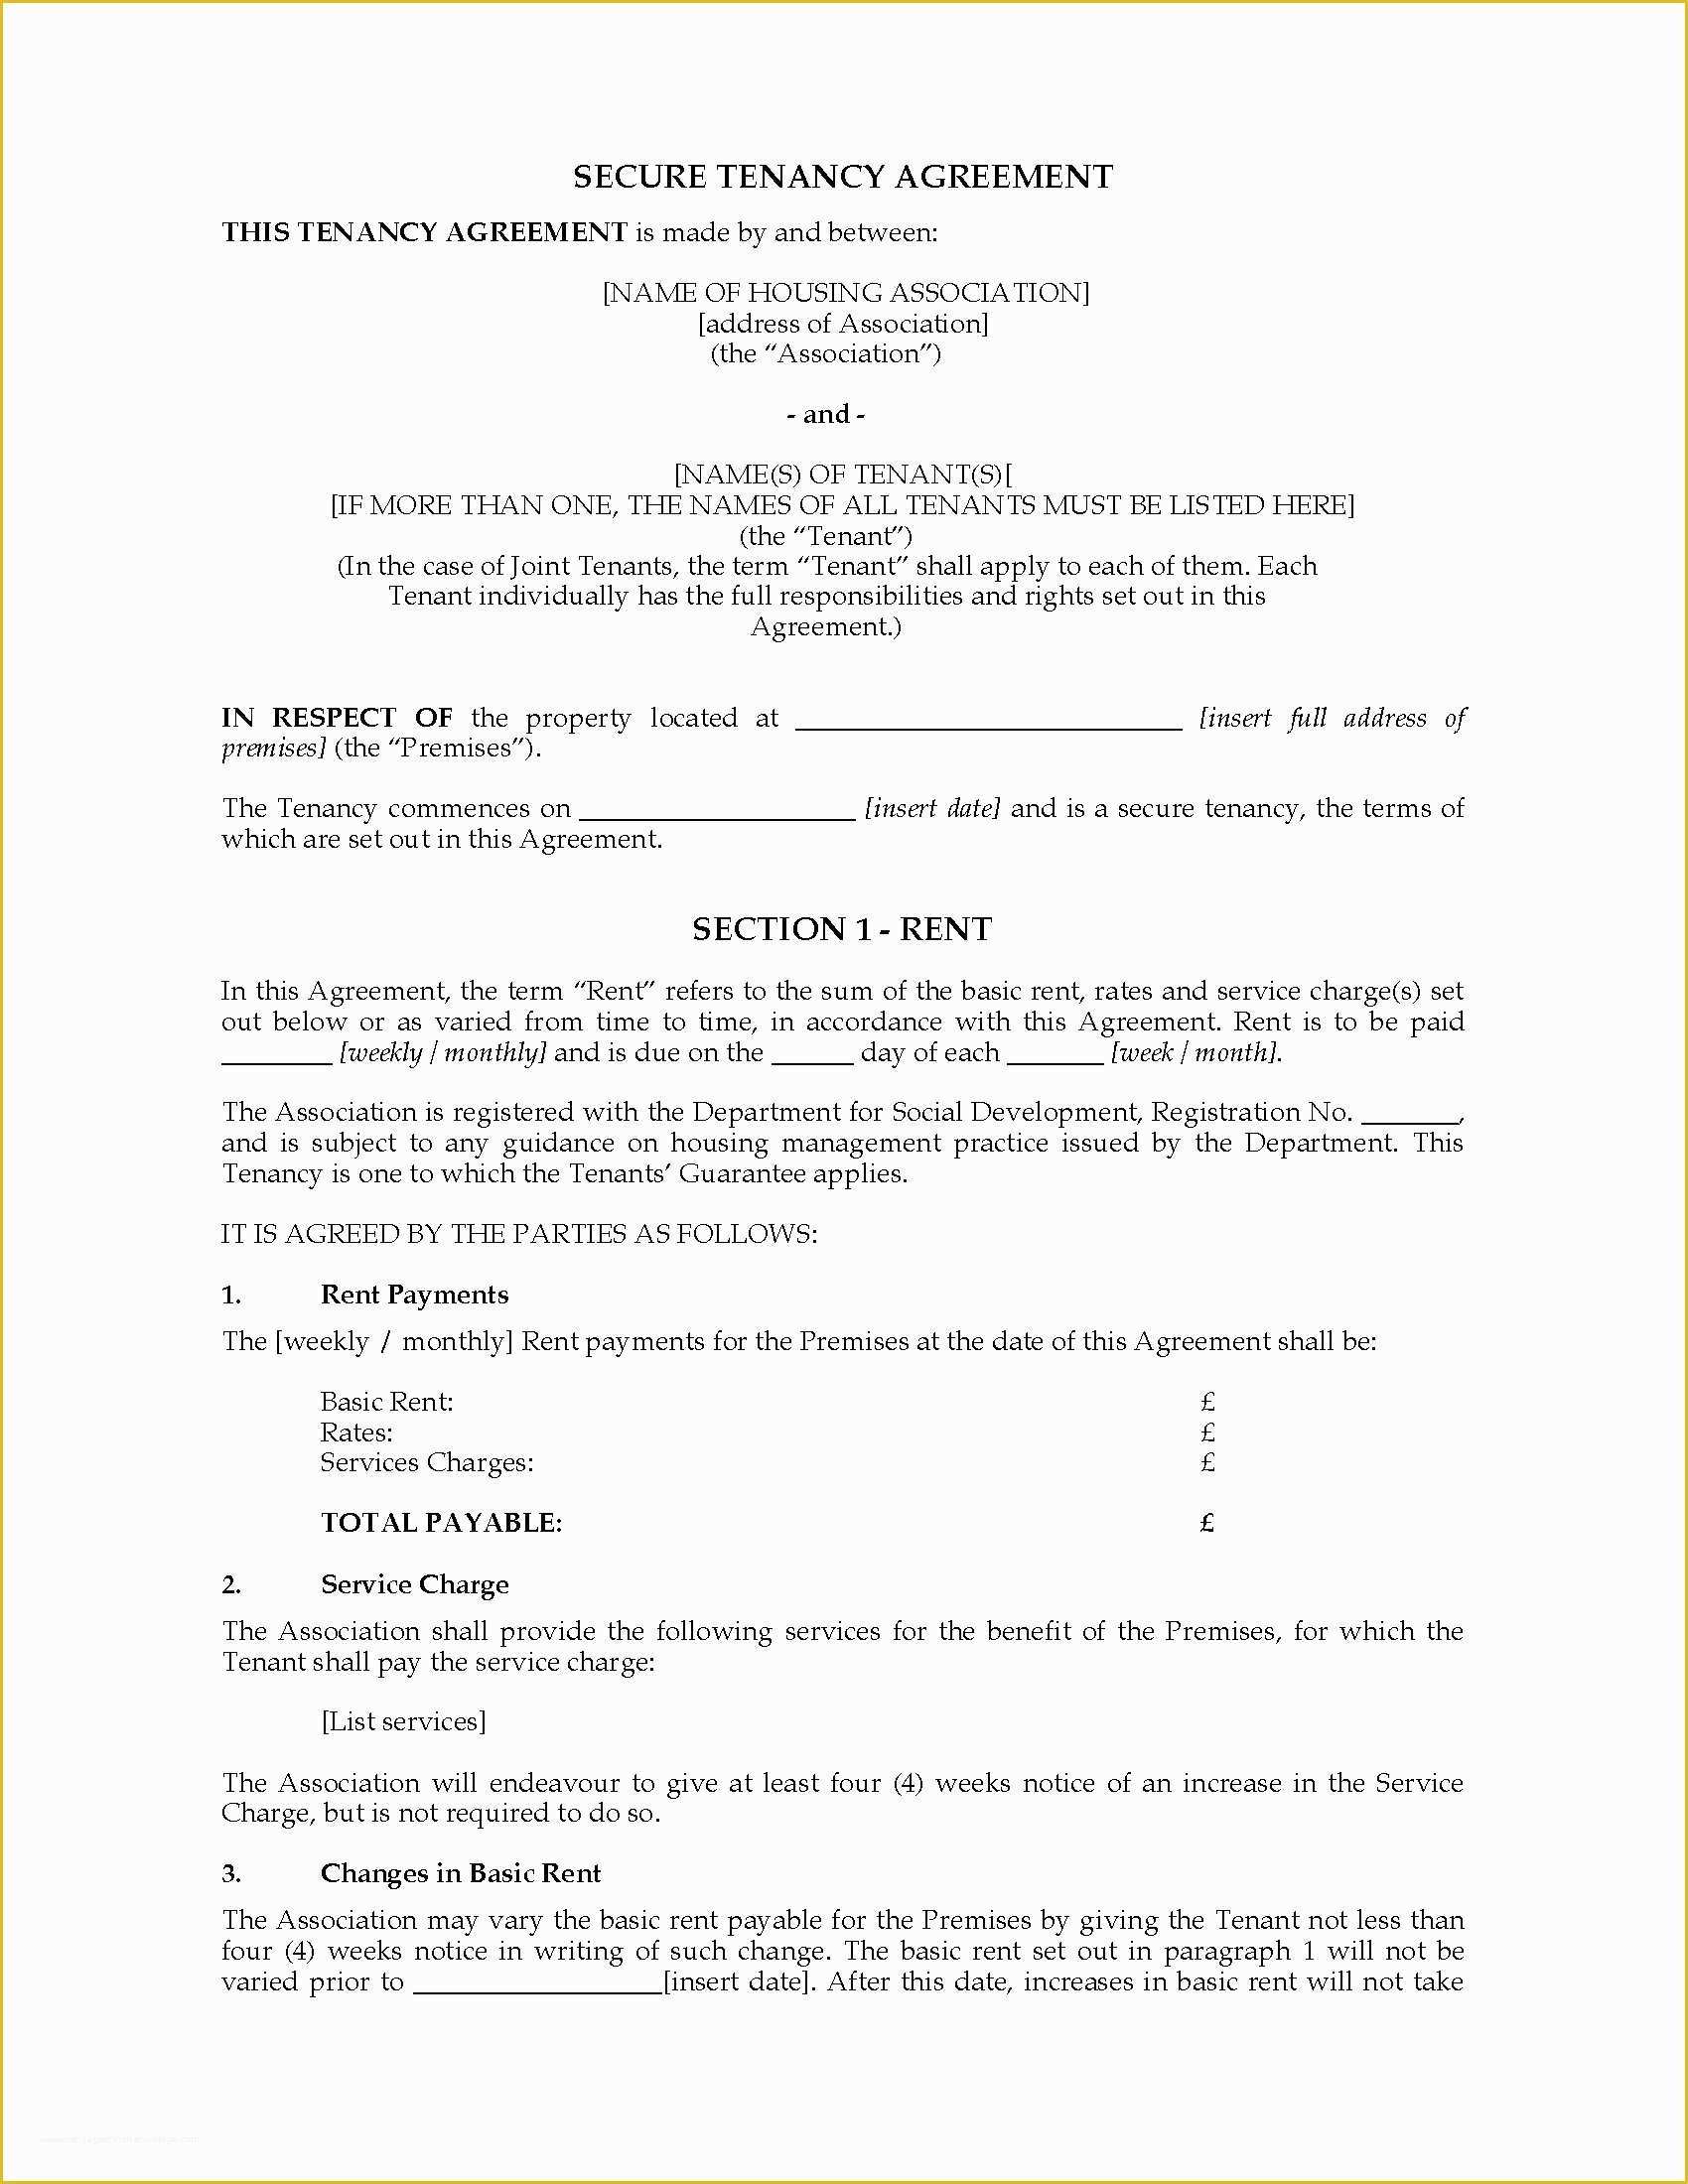 Tenancy Agreement form Template Free Of northern Ireland Secure Tenancy Agreement